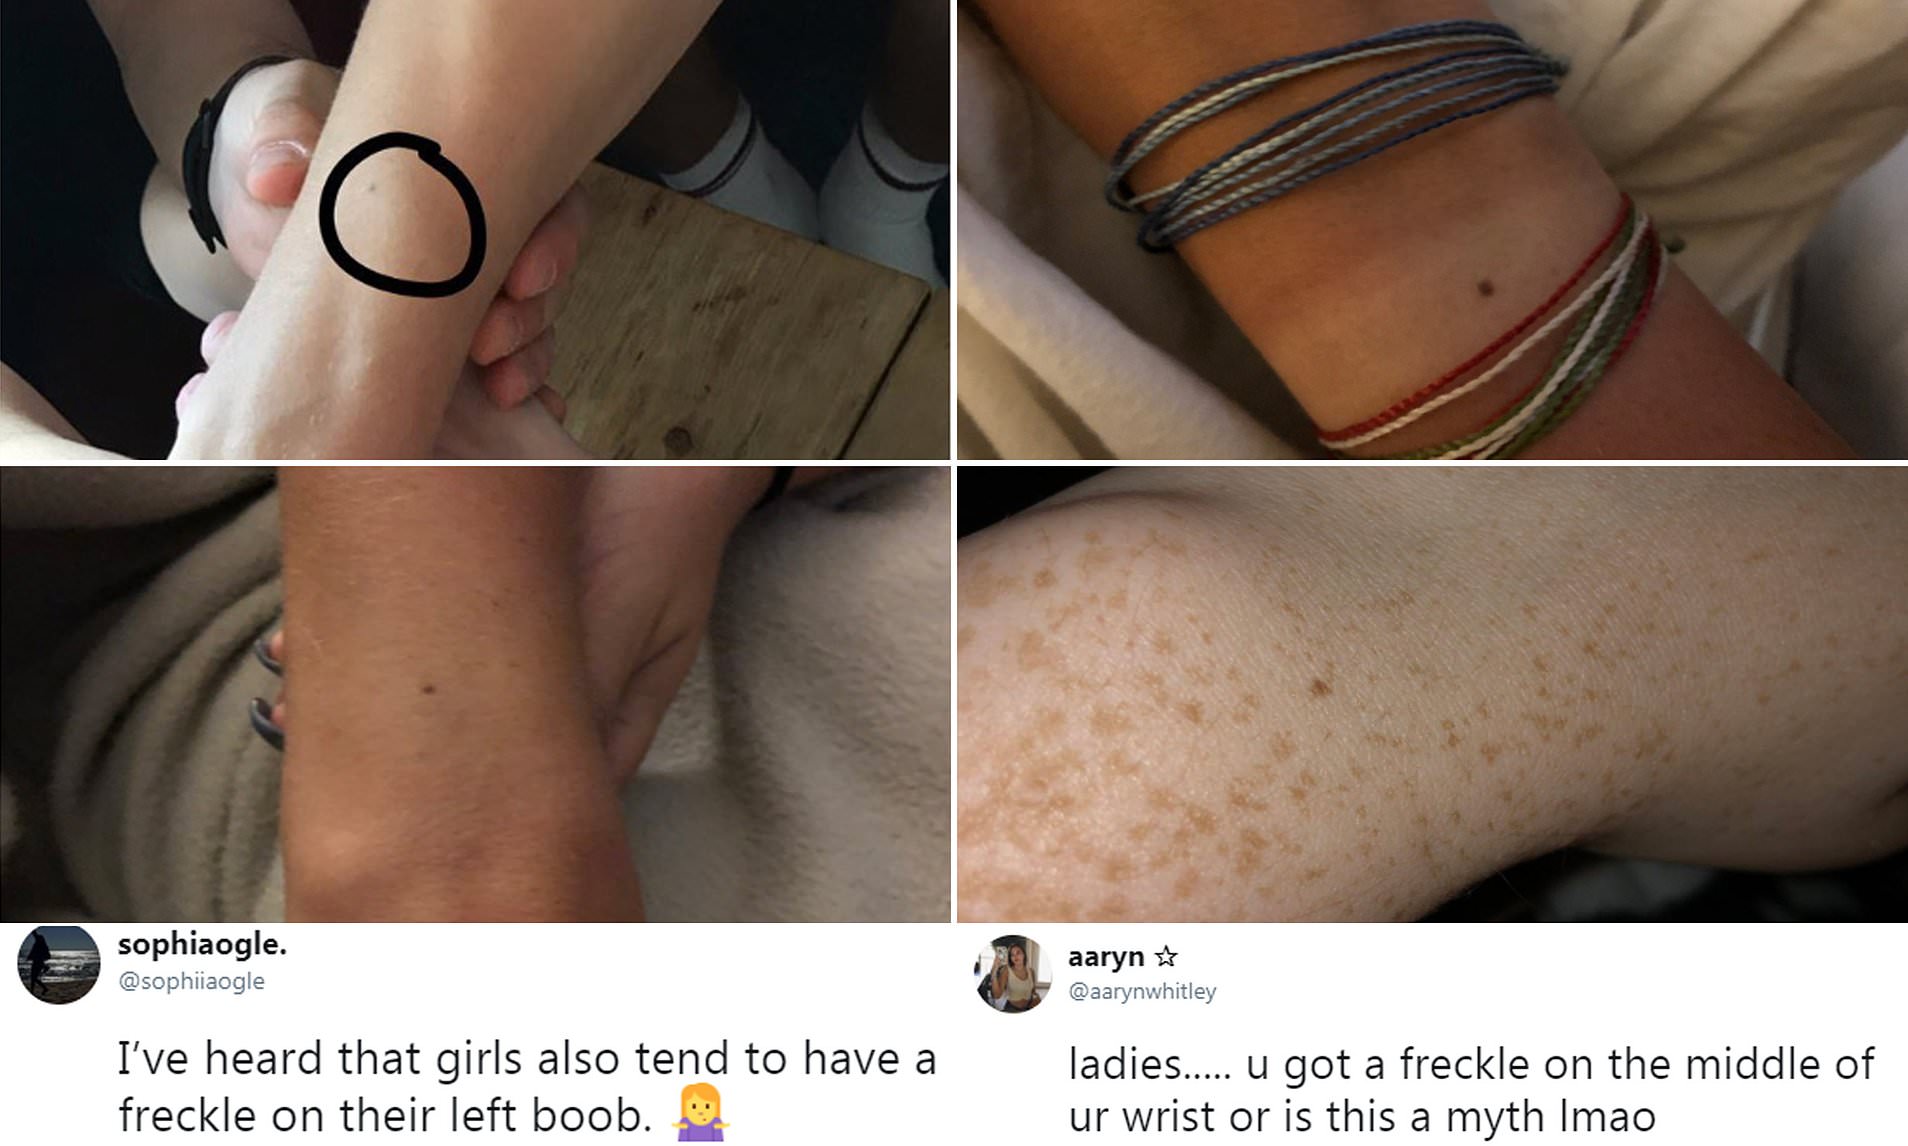 angela voysey recommends freckles on boobs pic